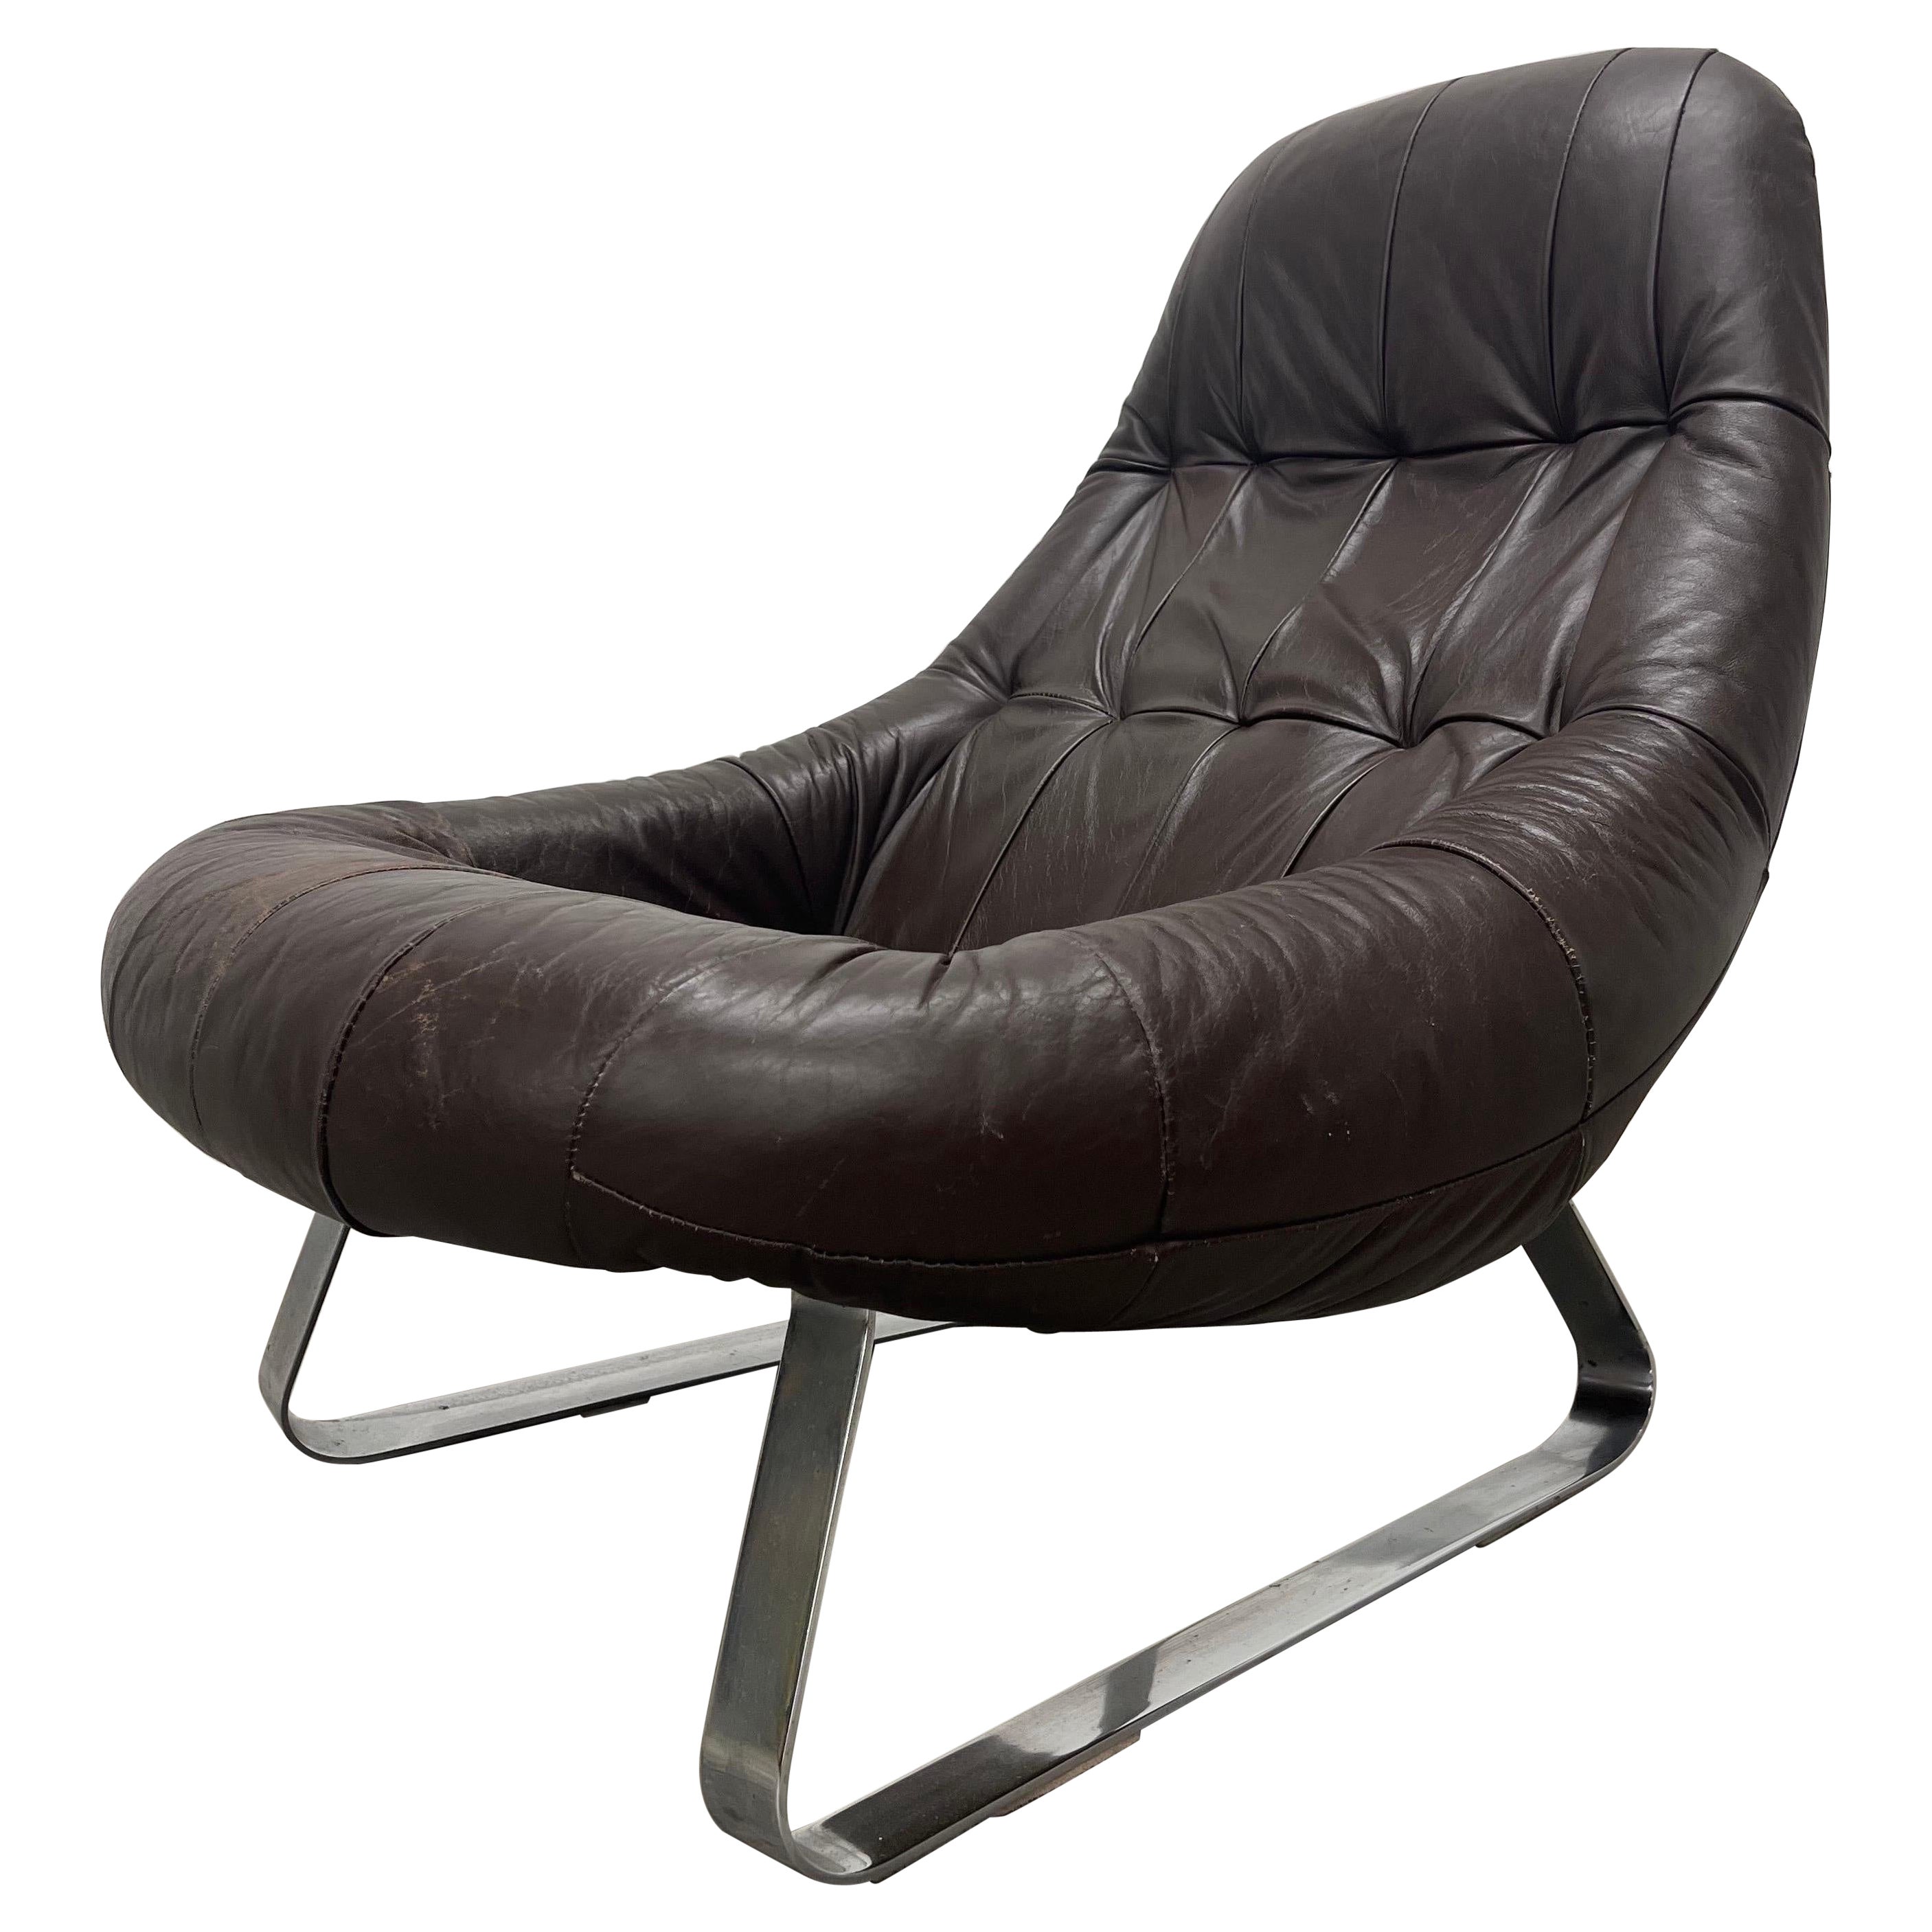 Mid-Century Modern Percival Lafer “Earth Lounge” Chair